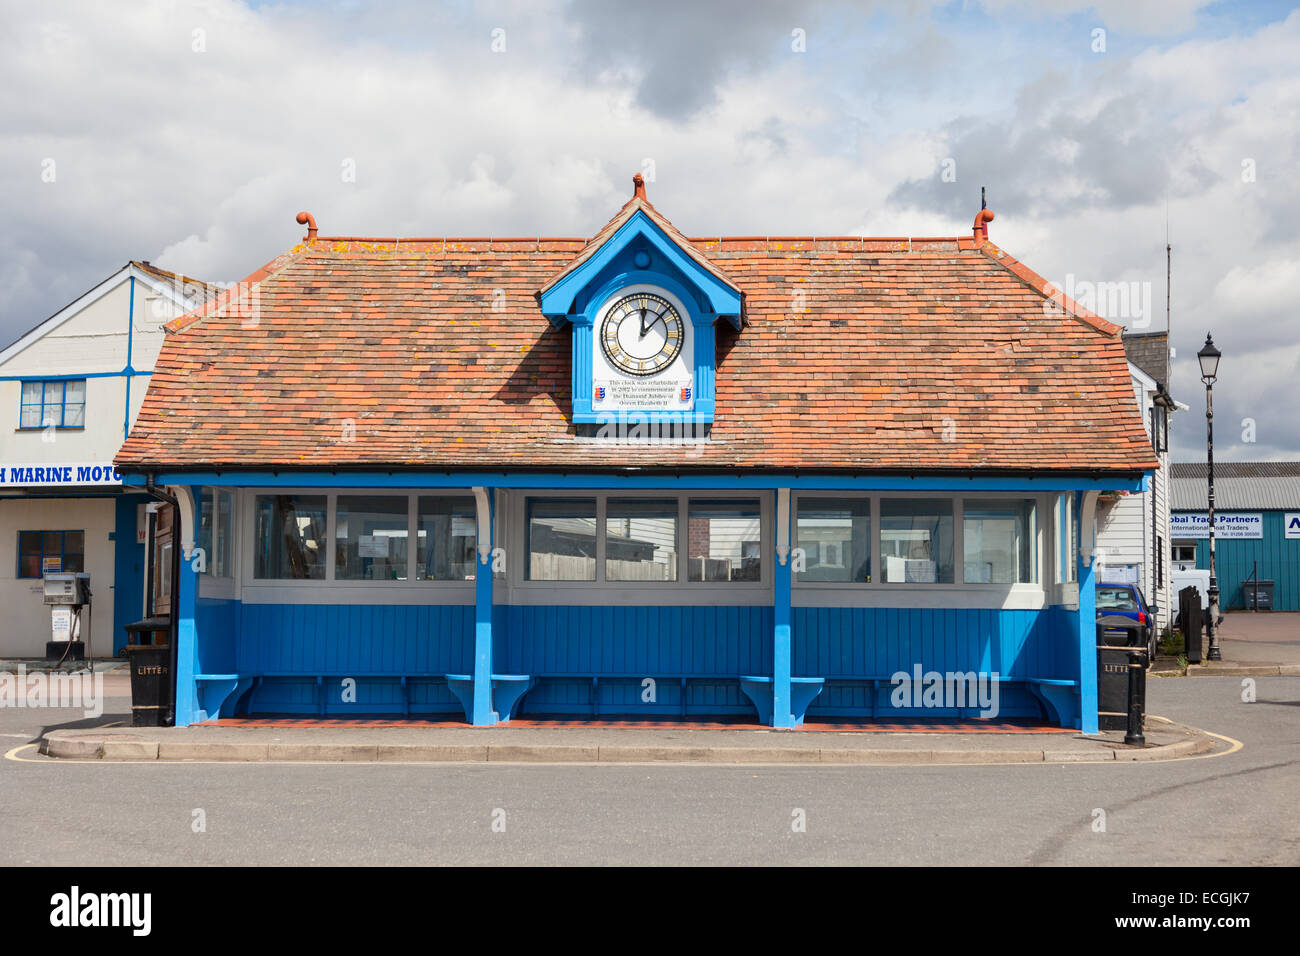 Brightlingsea bus stop near the seafront marina with a memorial clock in the roofline Stock Photo